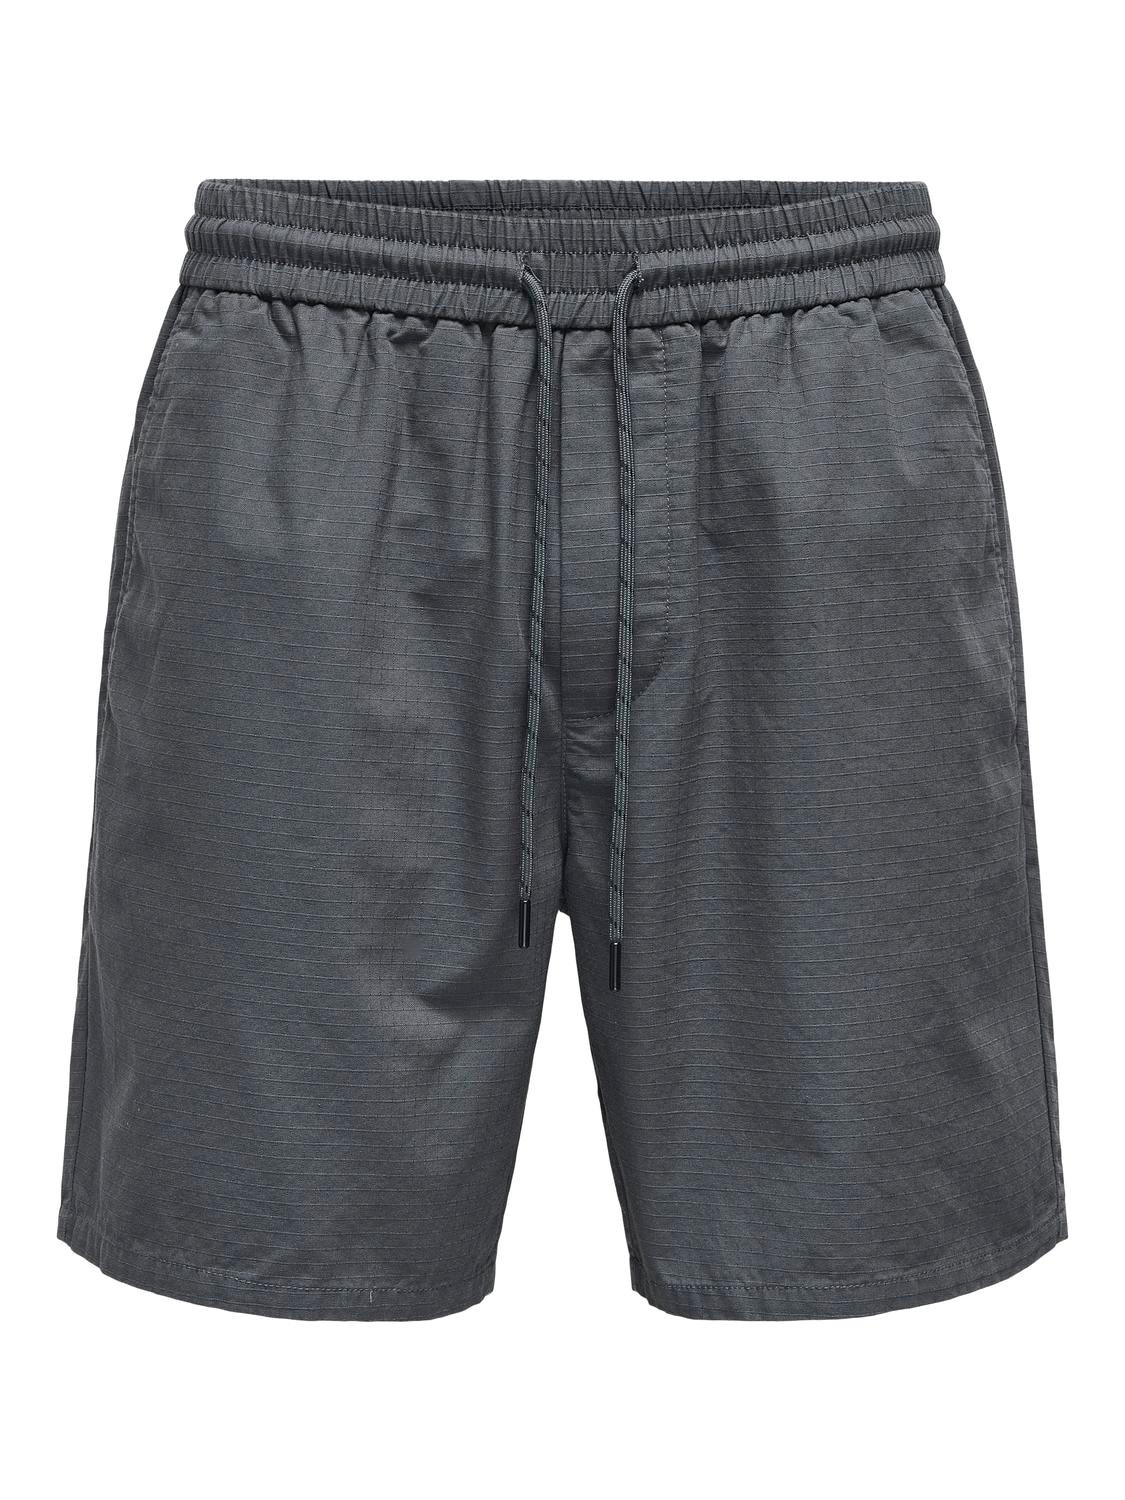 ONLY & SONS Normal passform Shorts -Grey Pinstripe - 22029691